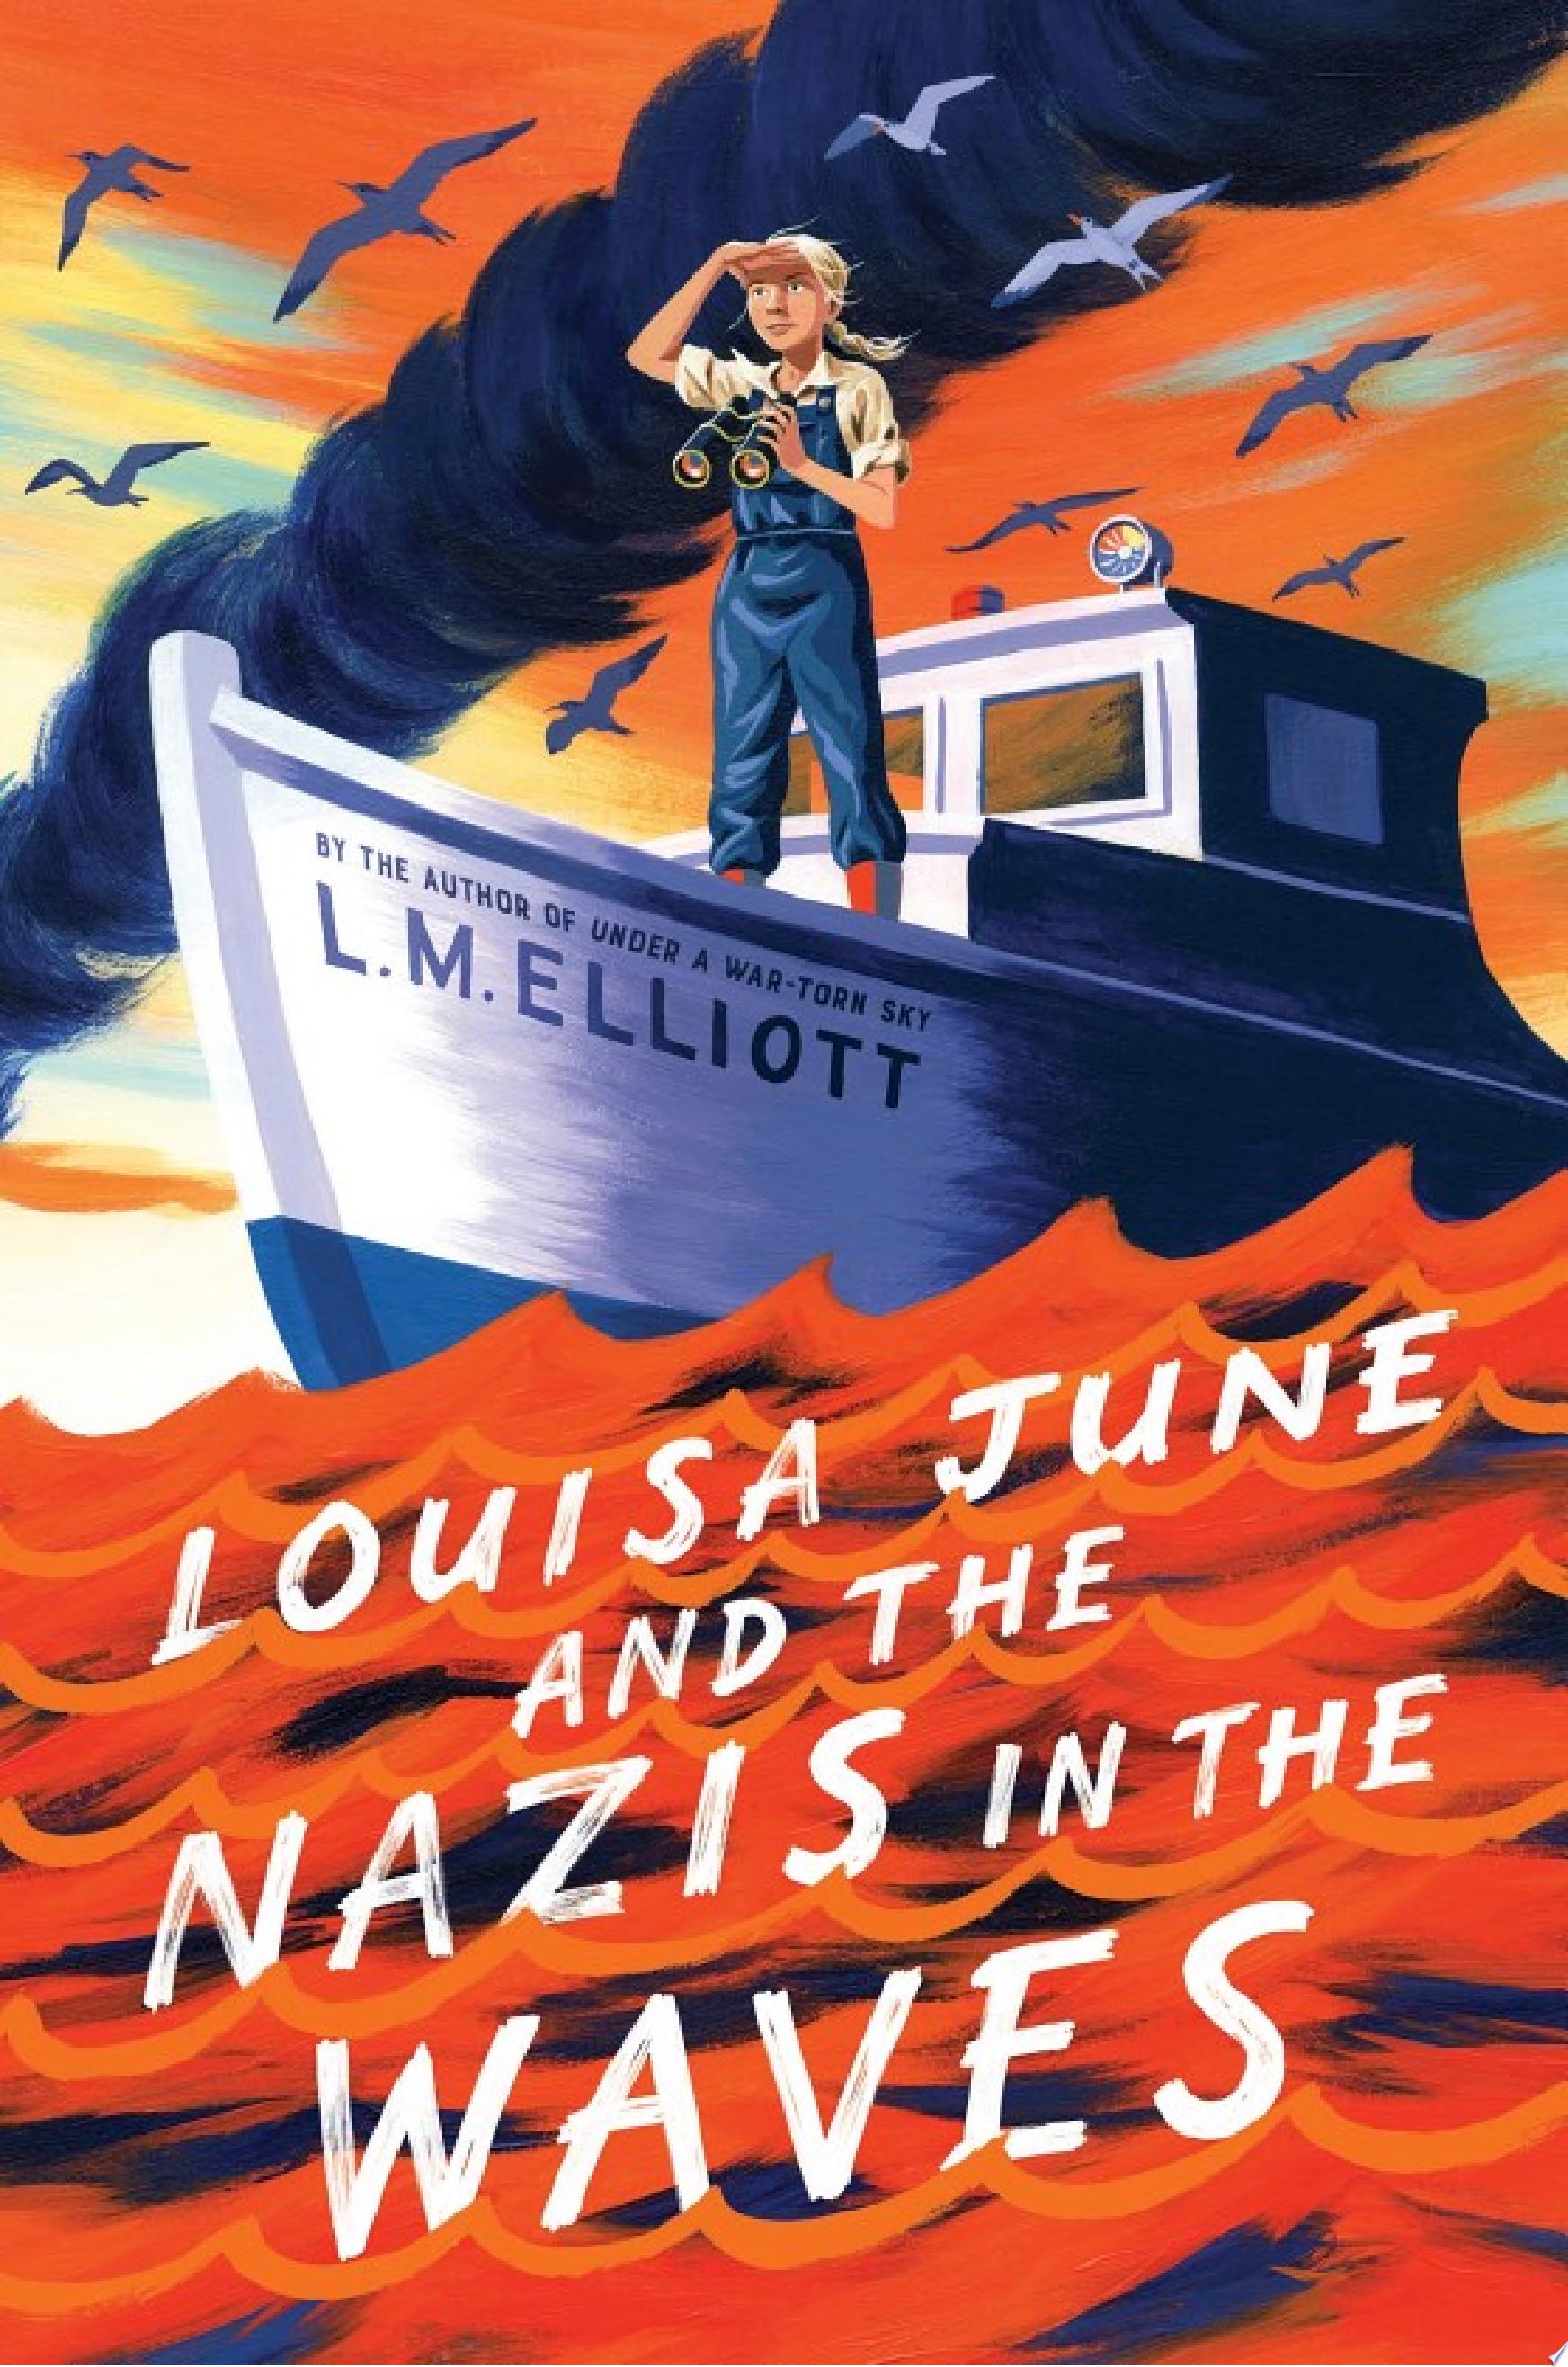 Image for "Louisa June and the Nazis in the Waves"